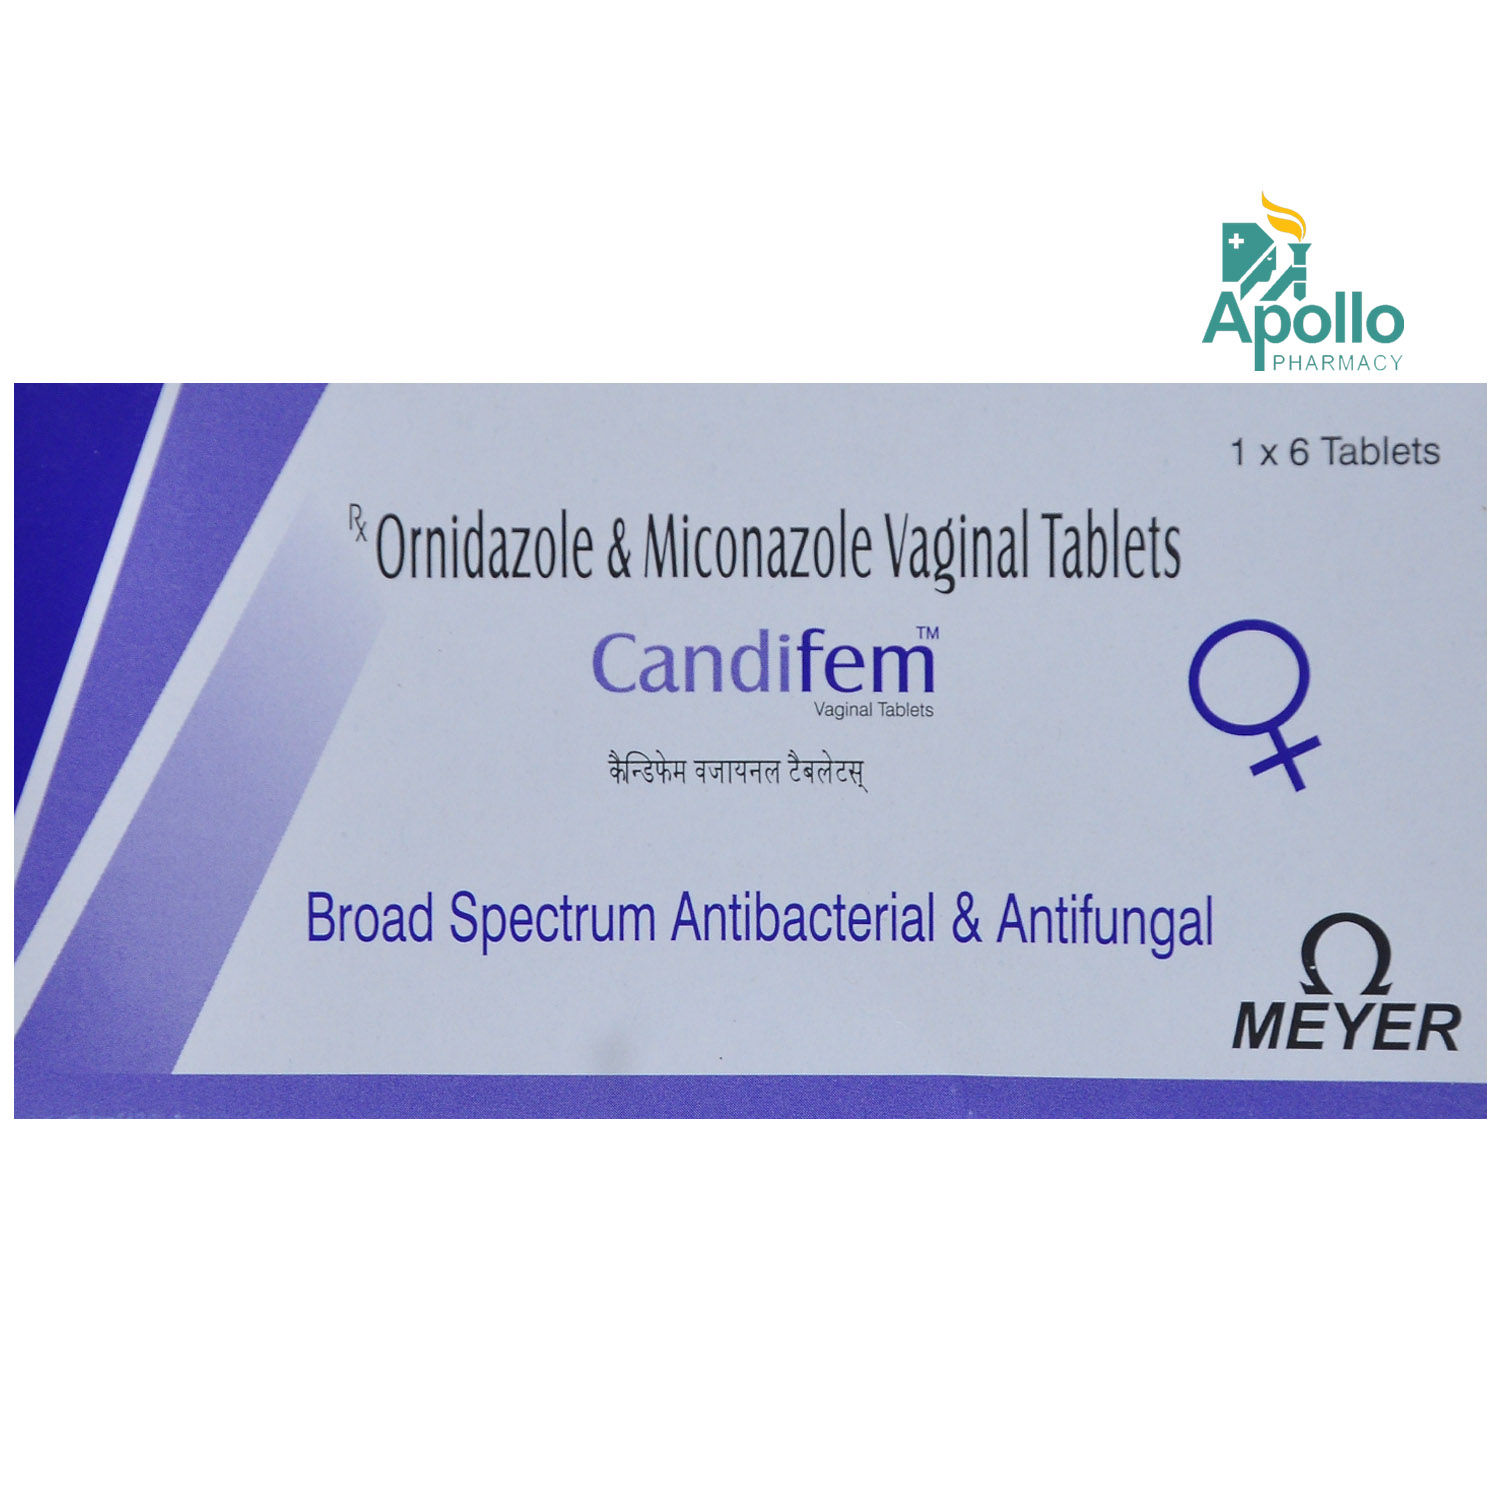 Candifem Vaginal Tablet Price Uses Side Effects Composition Apollo 24 7